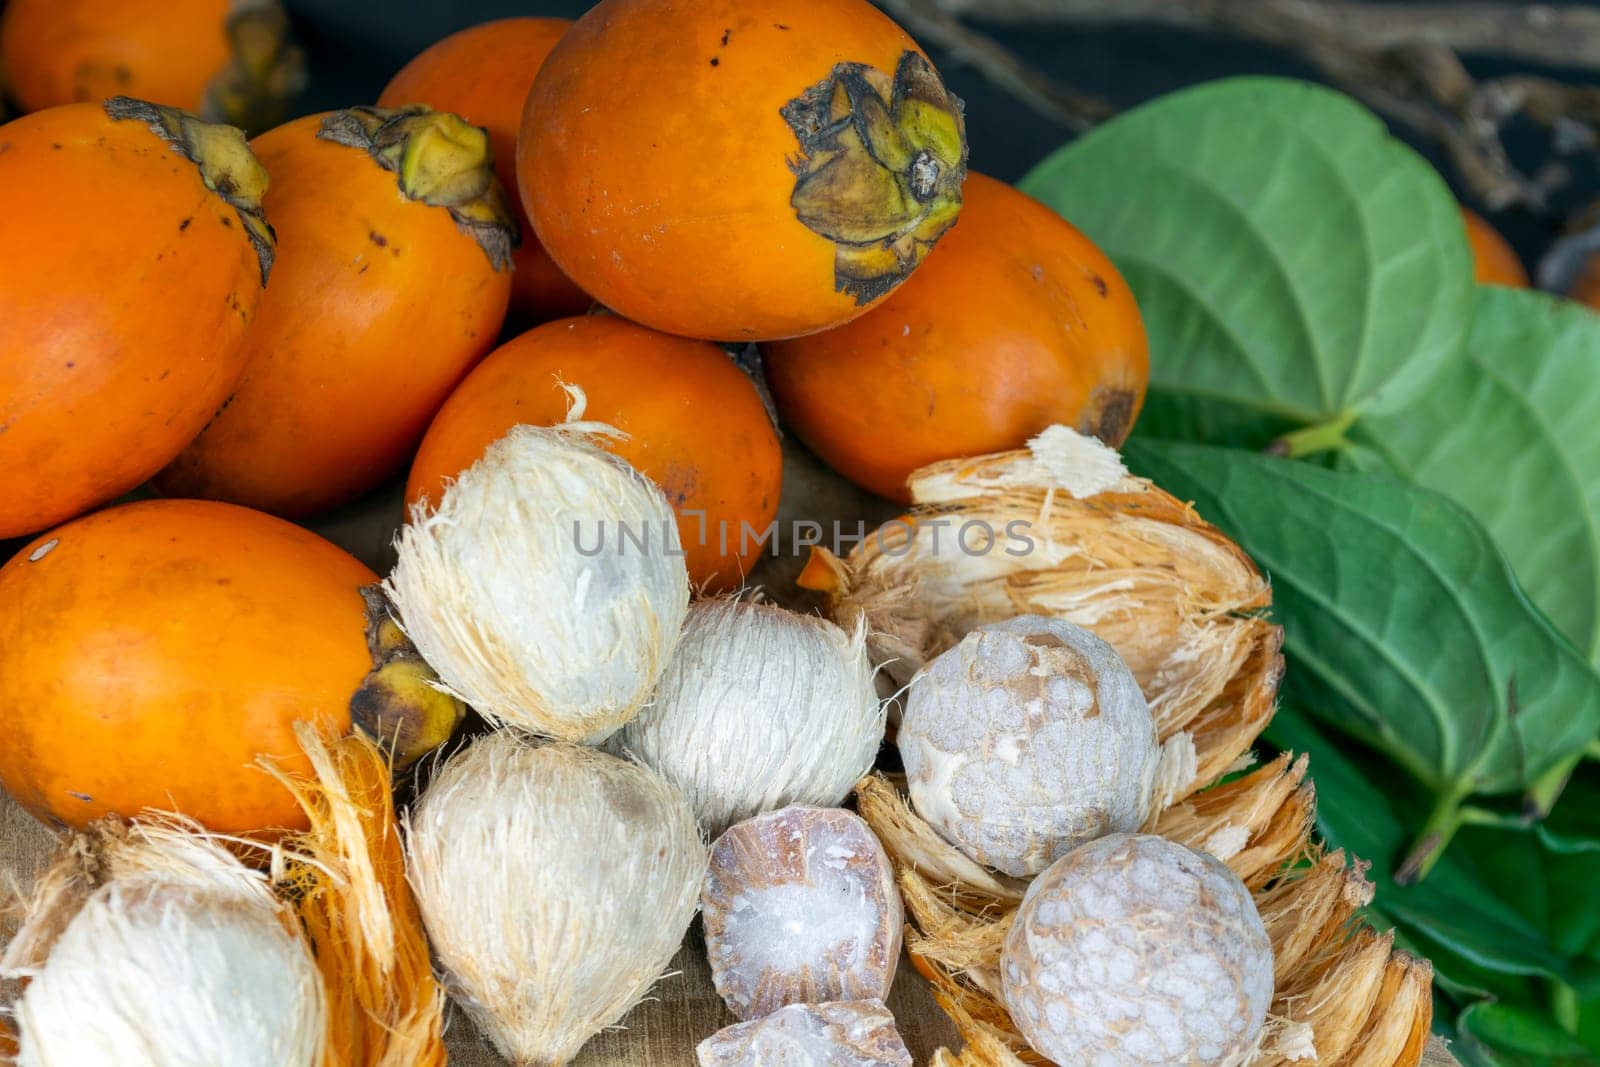 Ripe Betel nut or areca nut with betel leaf isolated on wooden background.